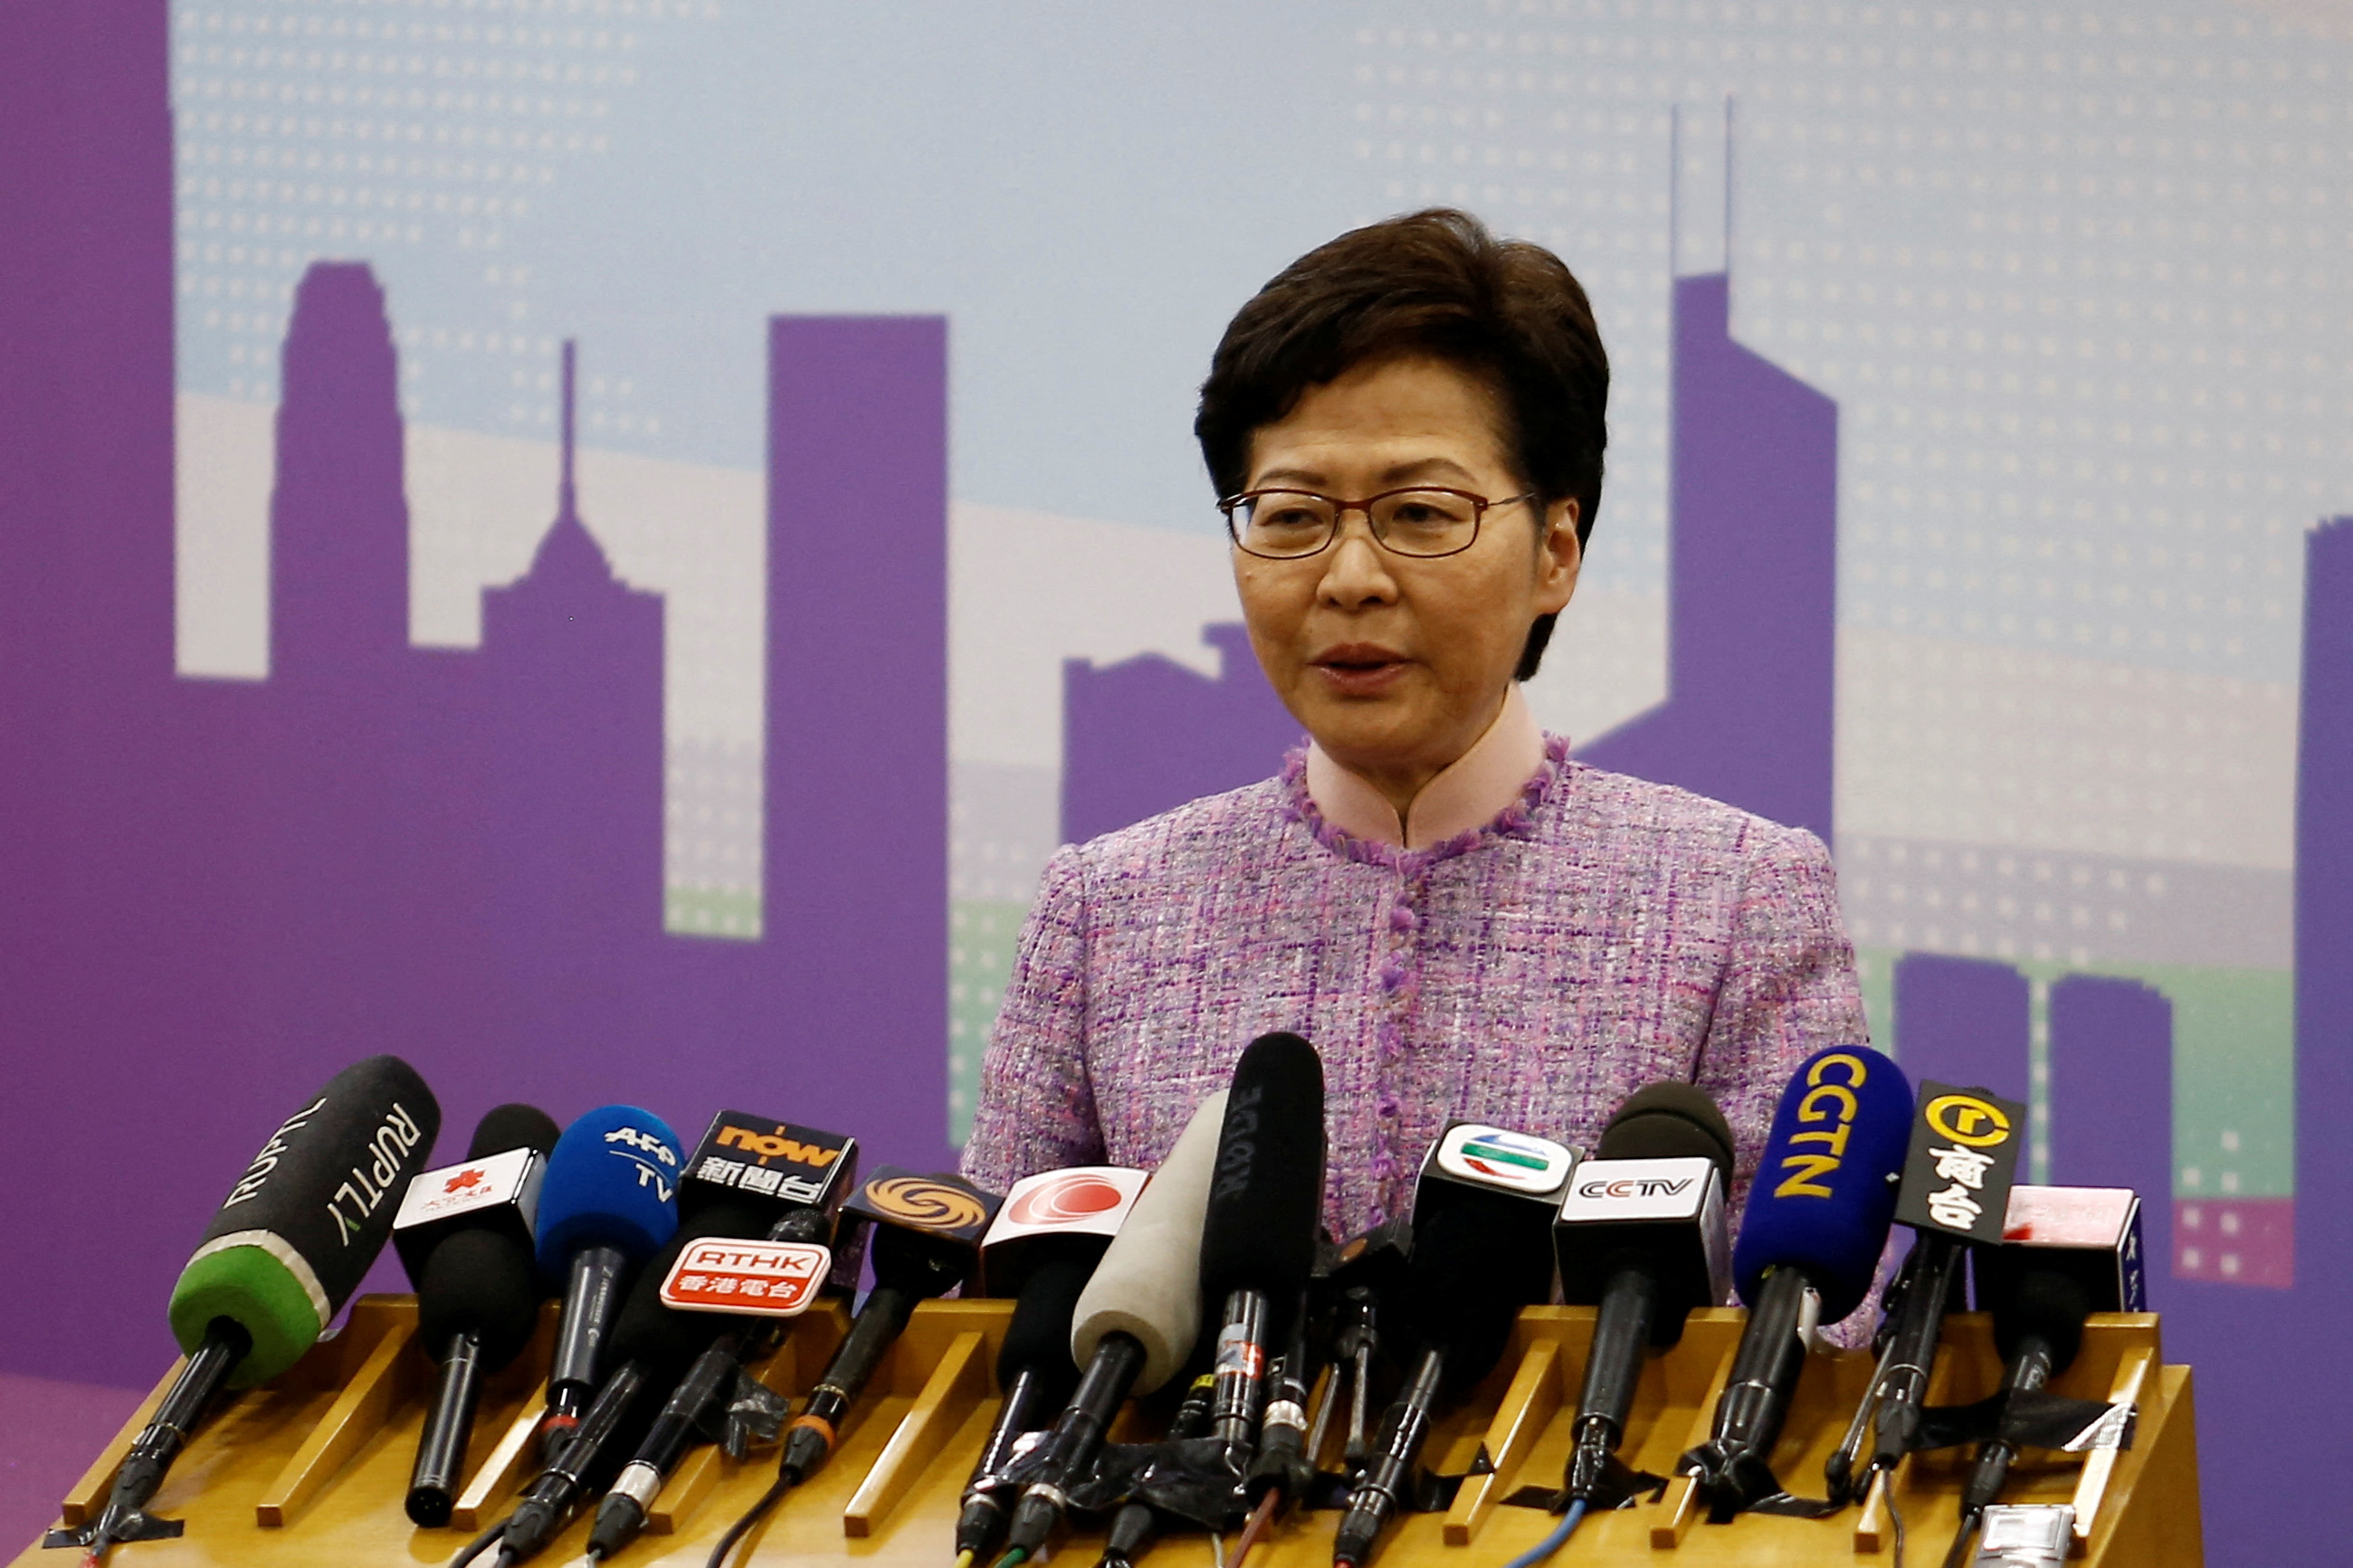 Hong Kong Chief Executive Carrie Lam speaks at a news conference in Beijing, China December 22, 2021. REUTERS/Shubing Wang